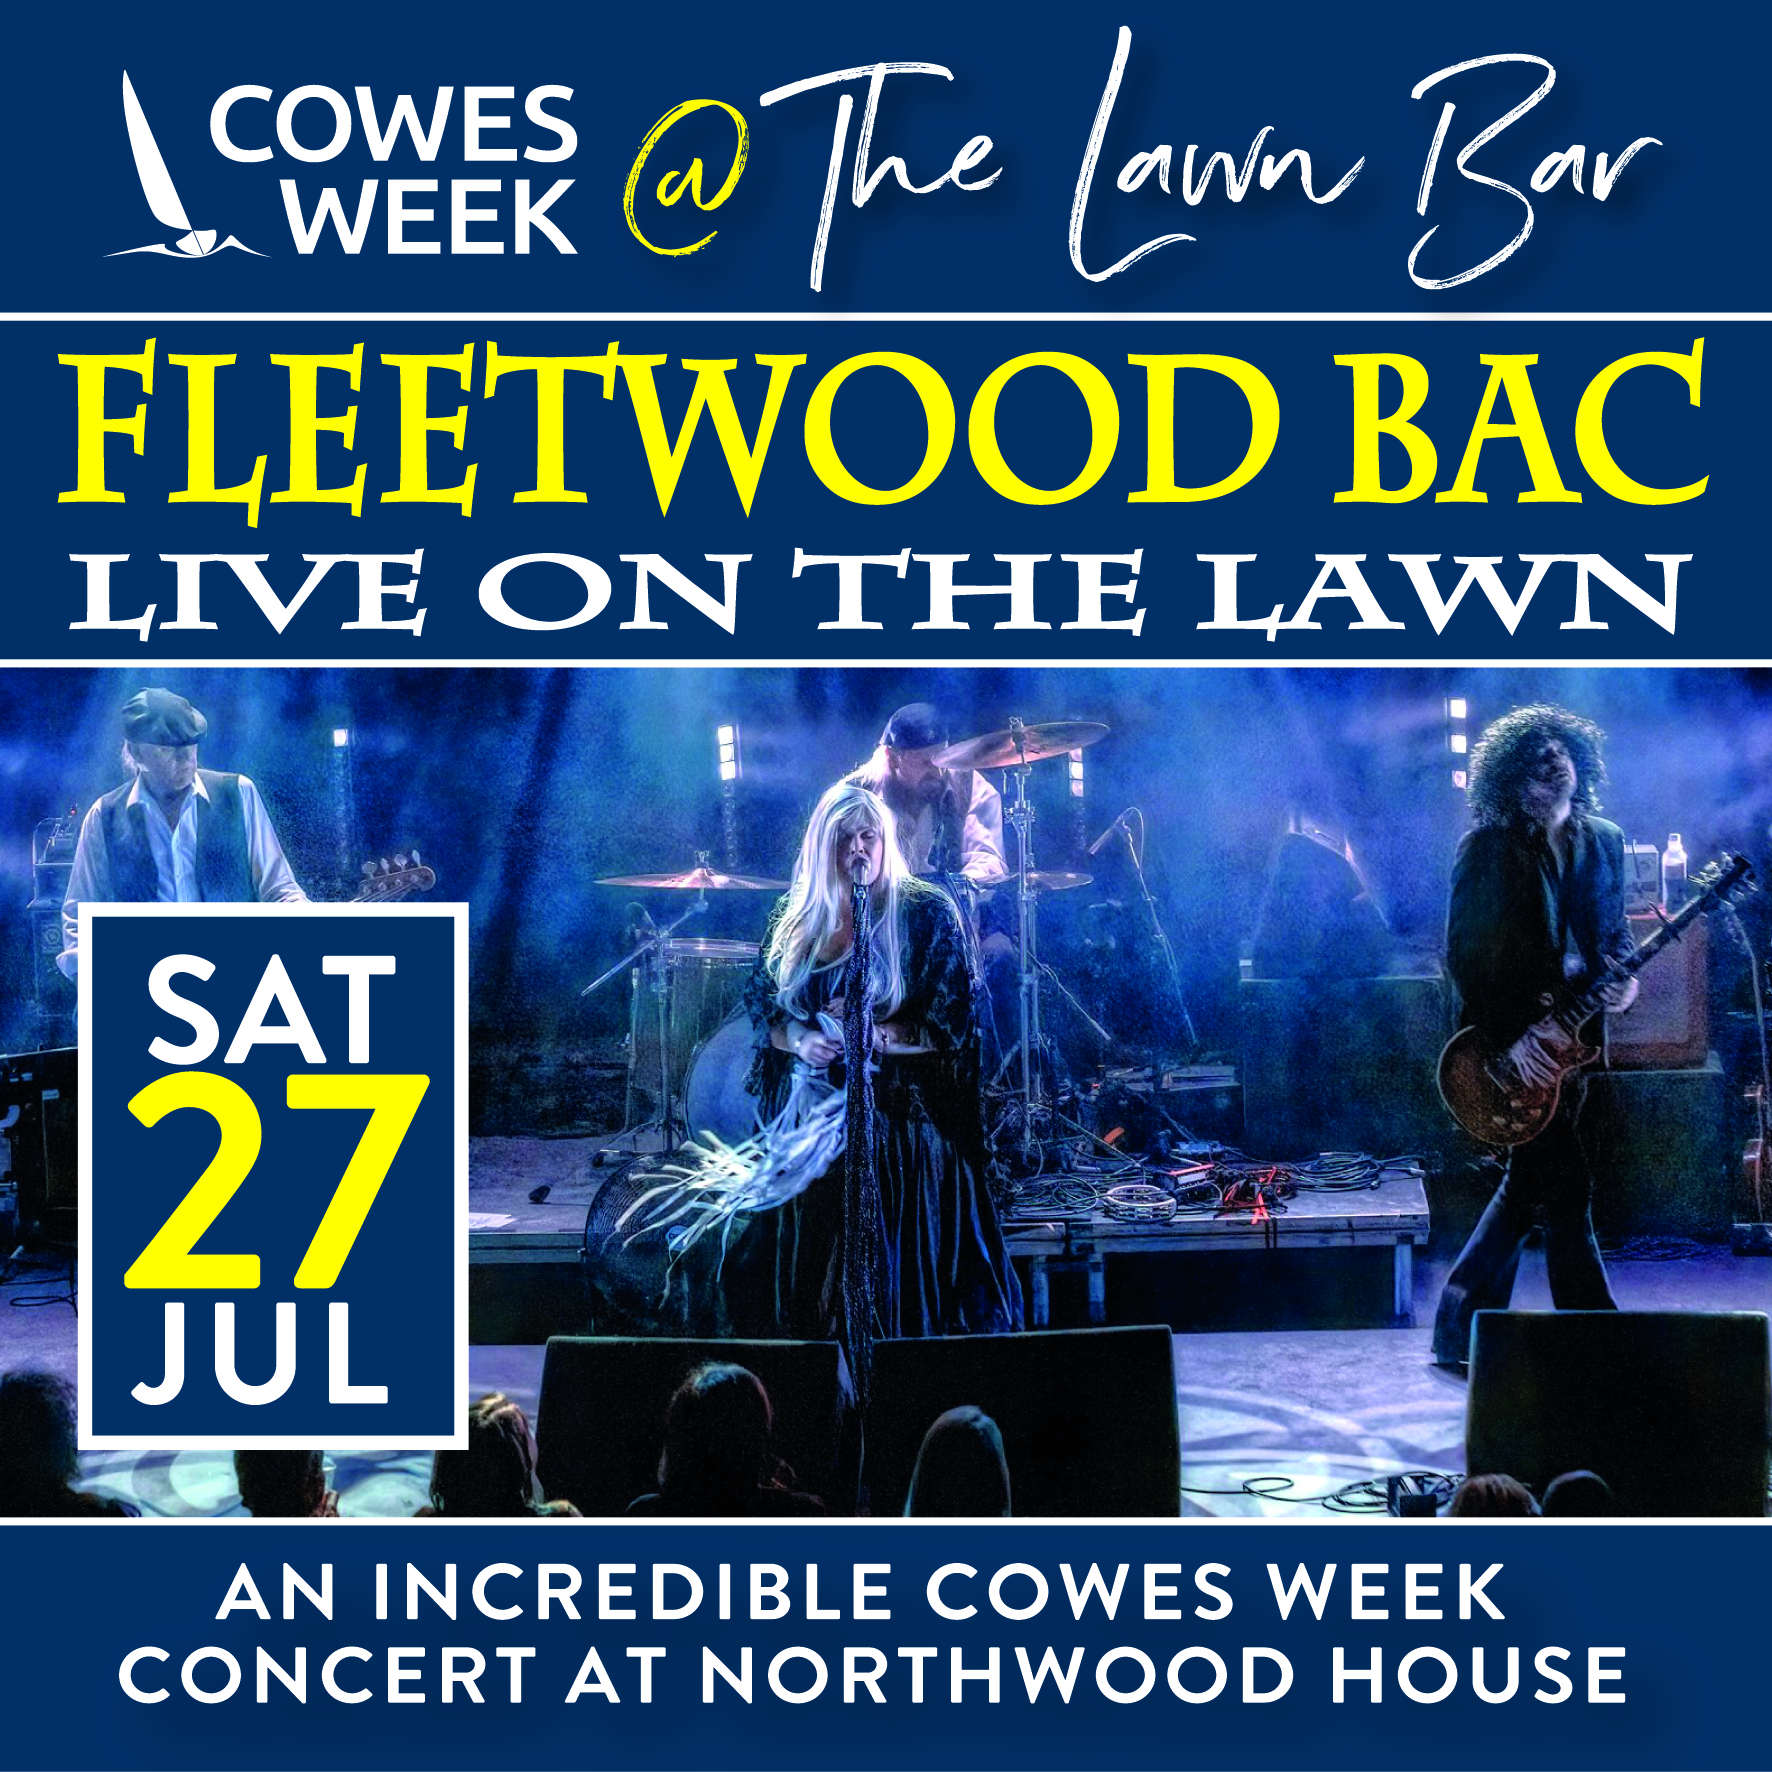 Fleetwood Bac: Live on the Lawn